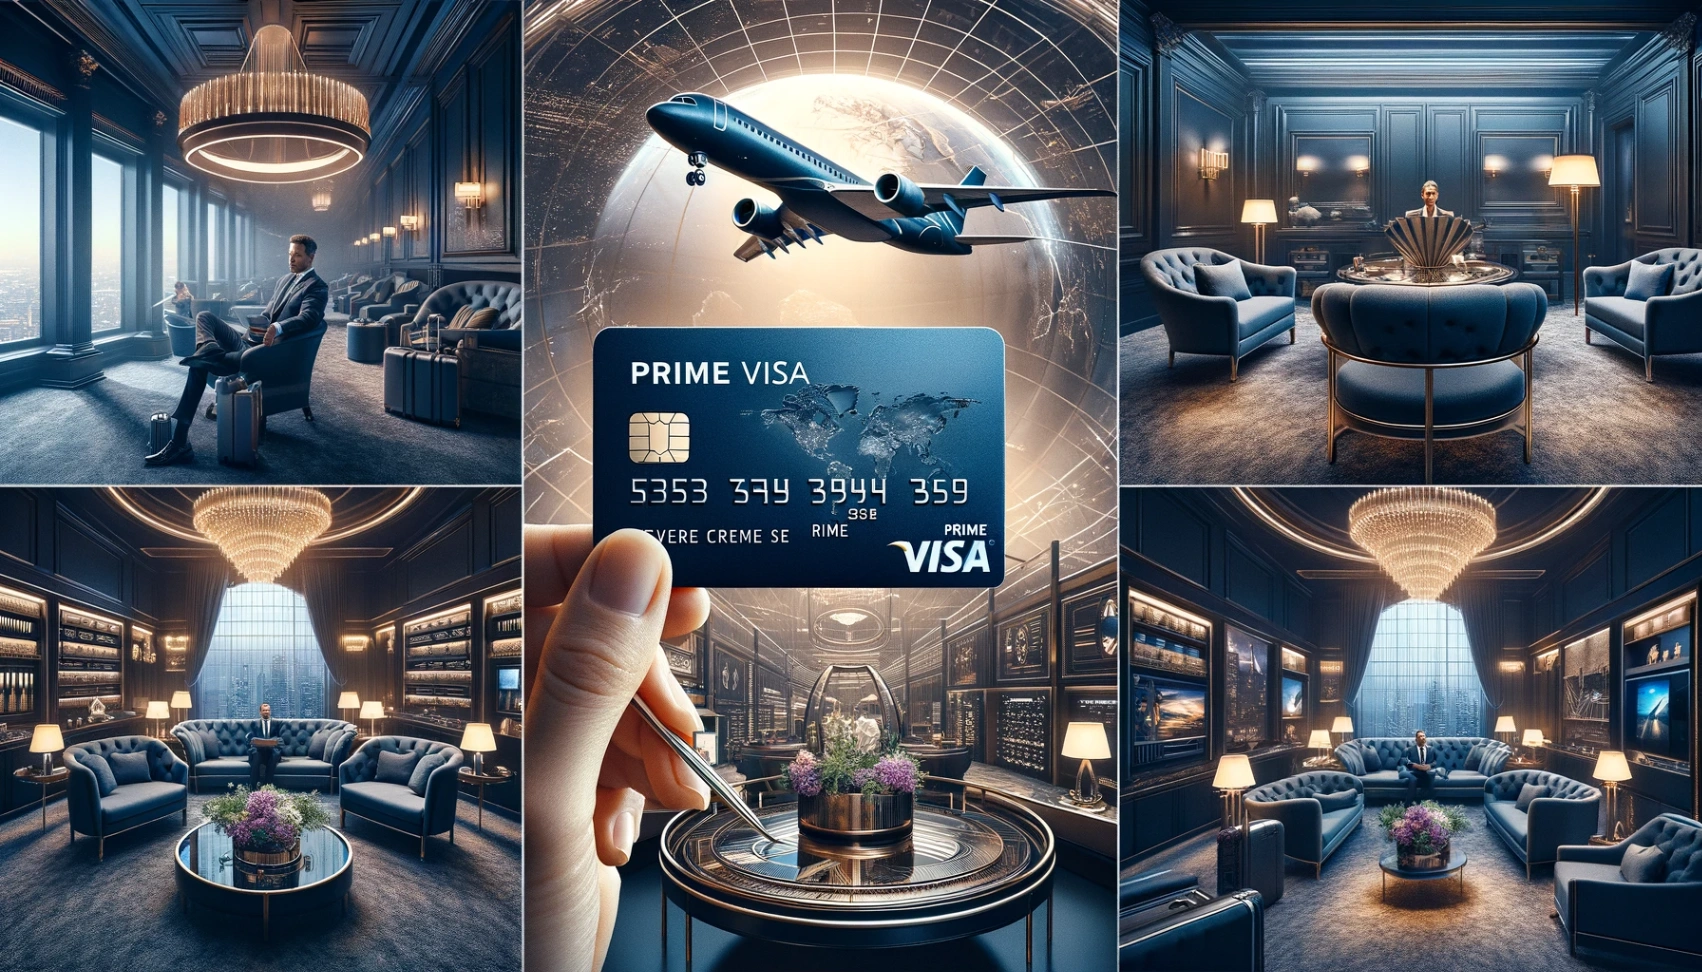 Prime Visa Credit Card - Learn How to Apply